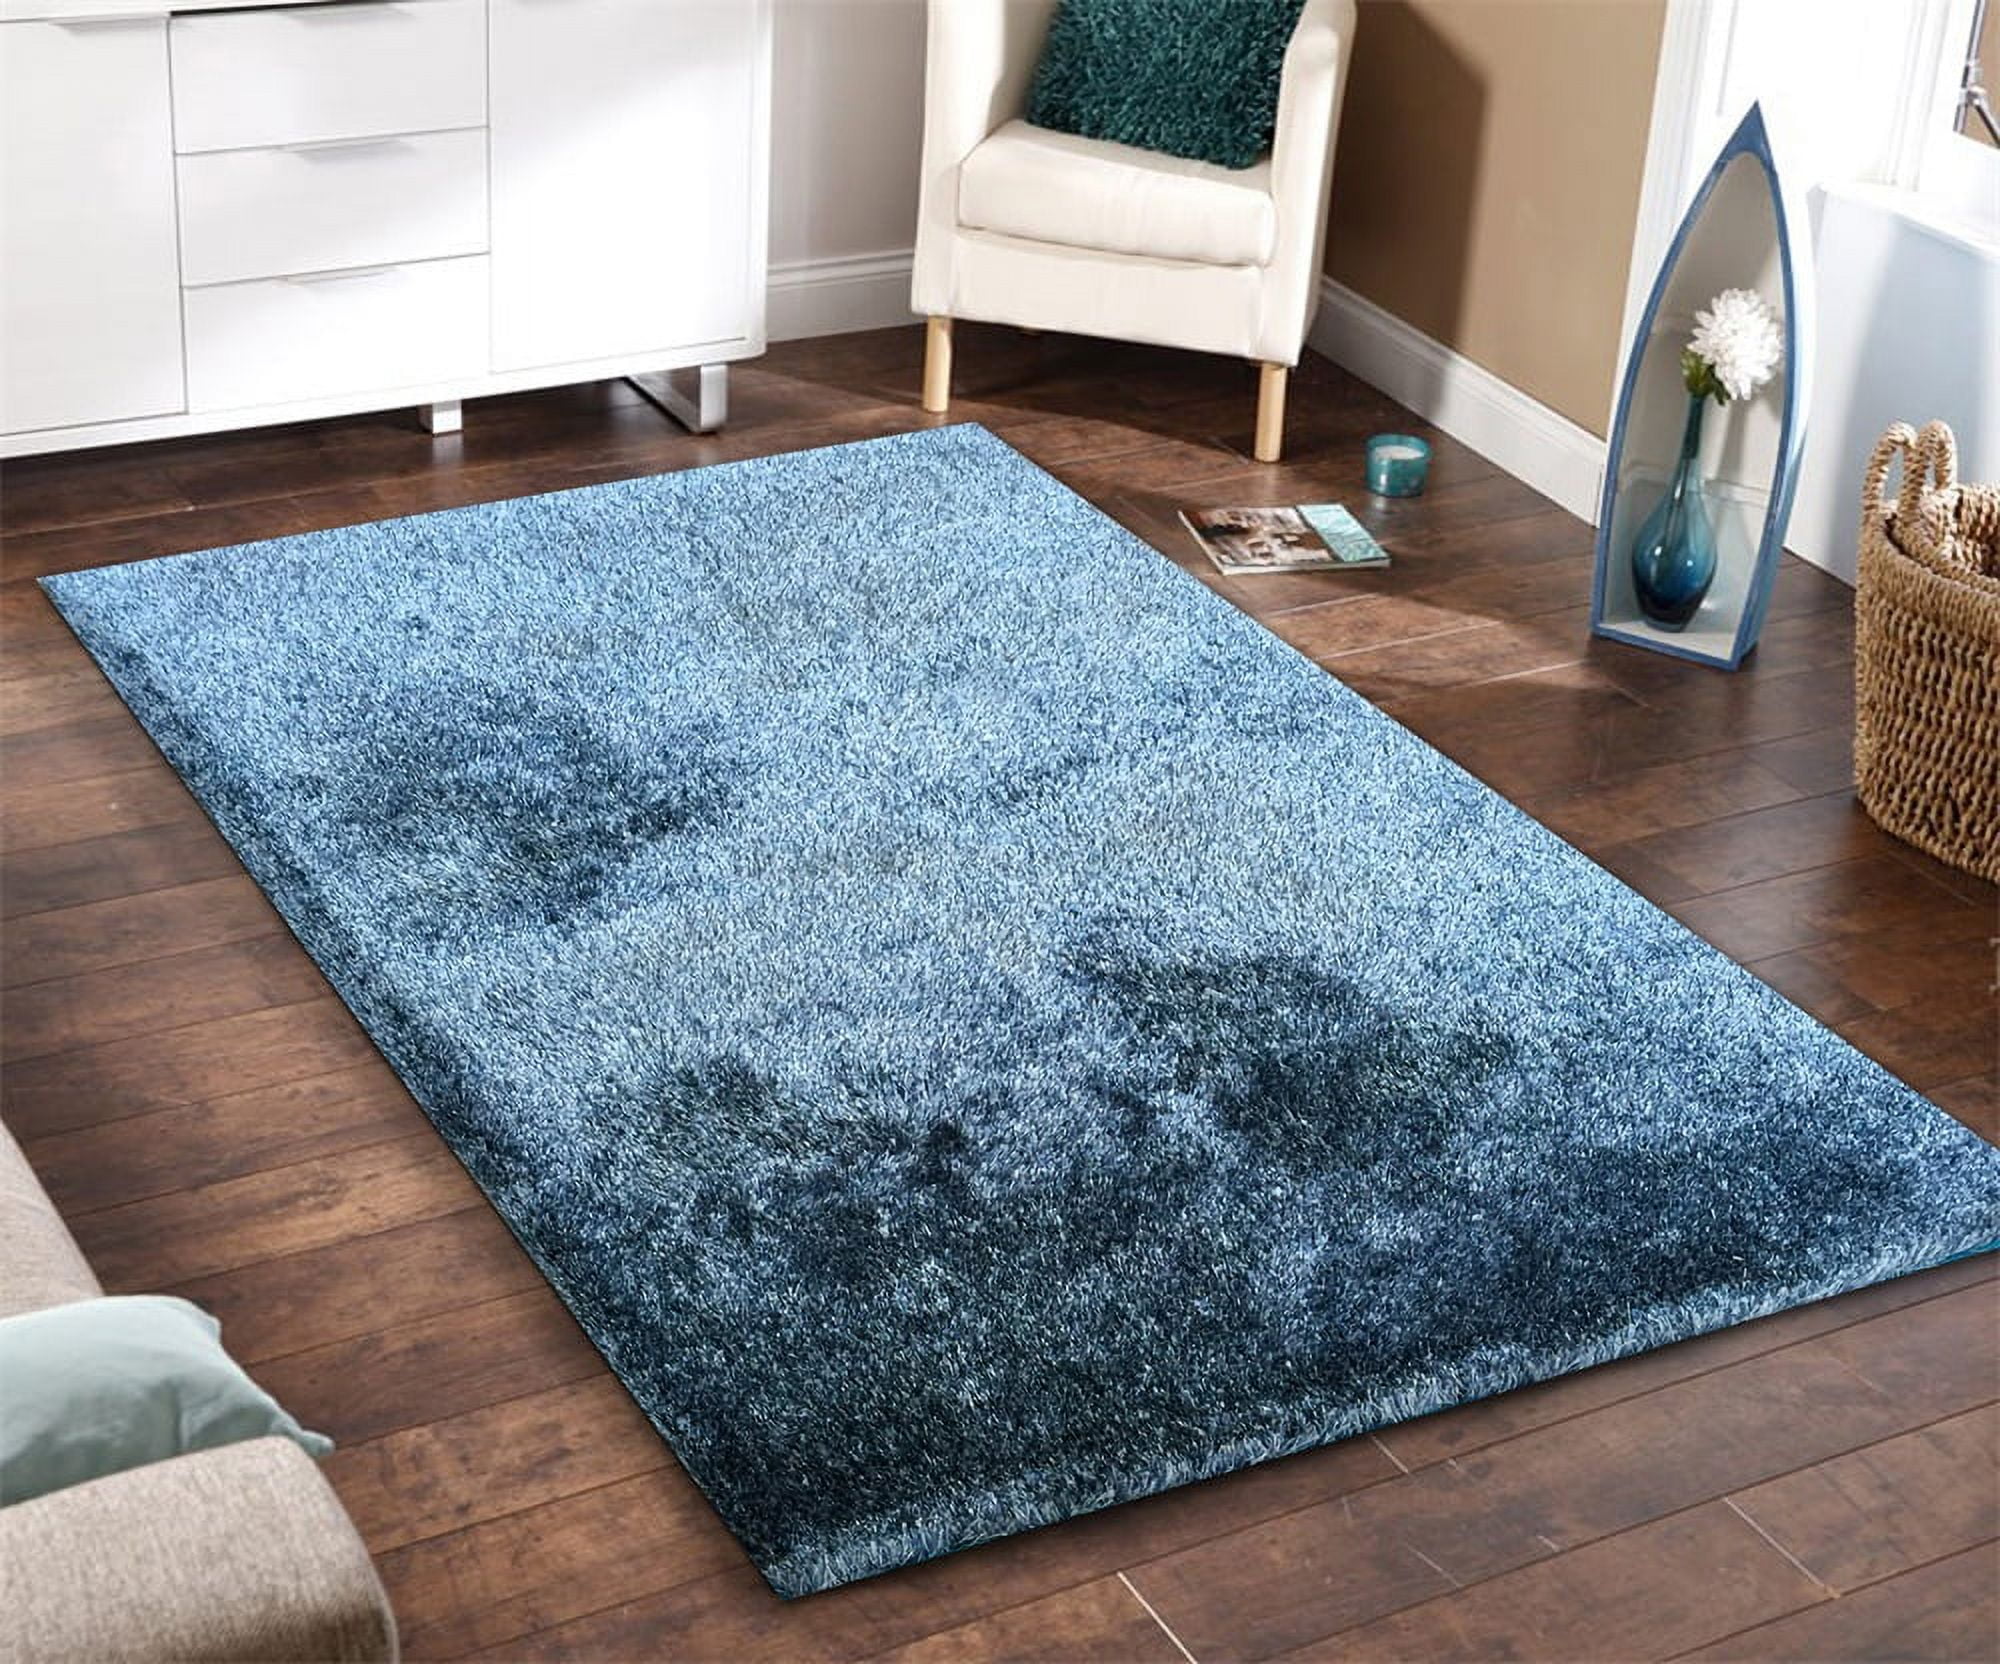  Modern Soft Area Rug Level maps for Game Traditional Asian  Houses on Islands Fantasy Land 3D Home Plush Rugs Non Slip Shaggy Carpets  for Living Room Bedroom Kids Playroom Decor 5'3x7'9 